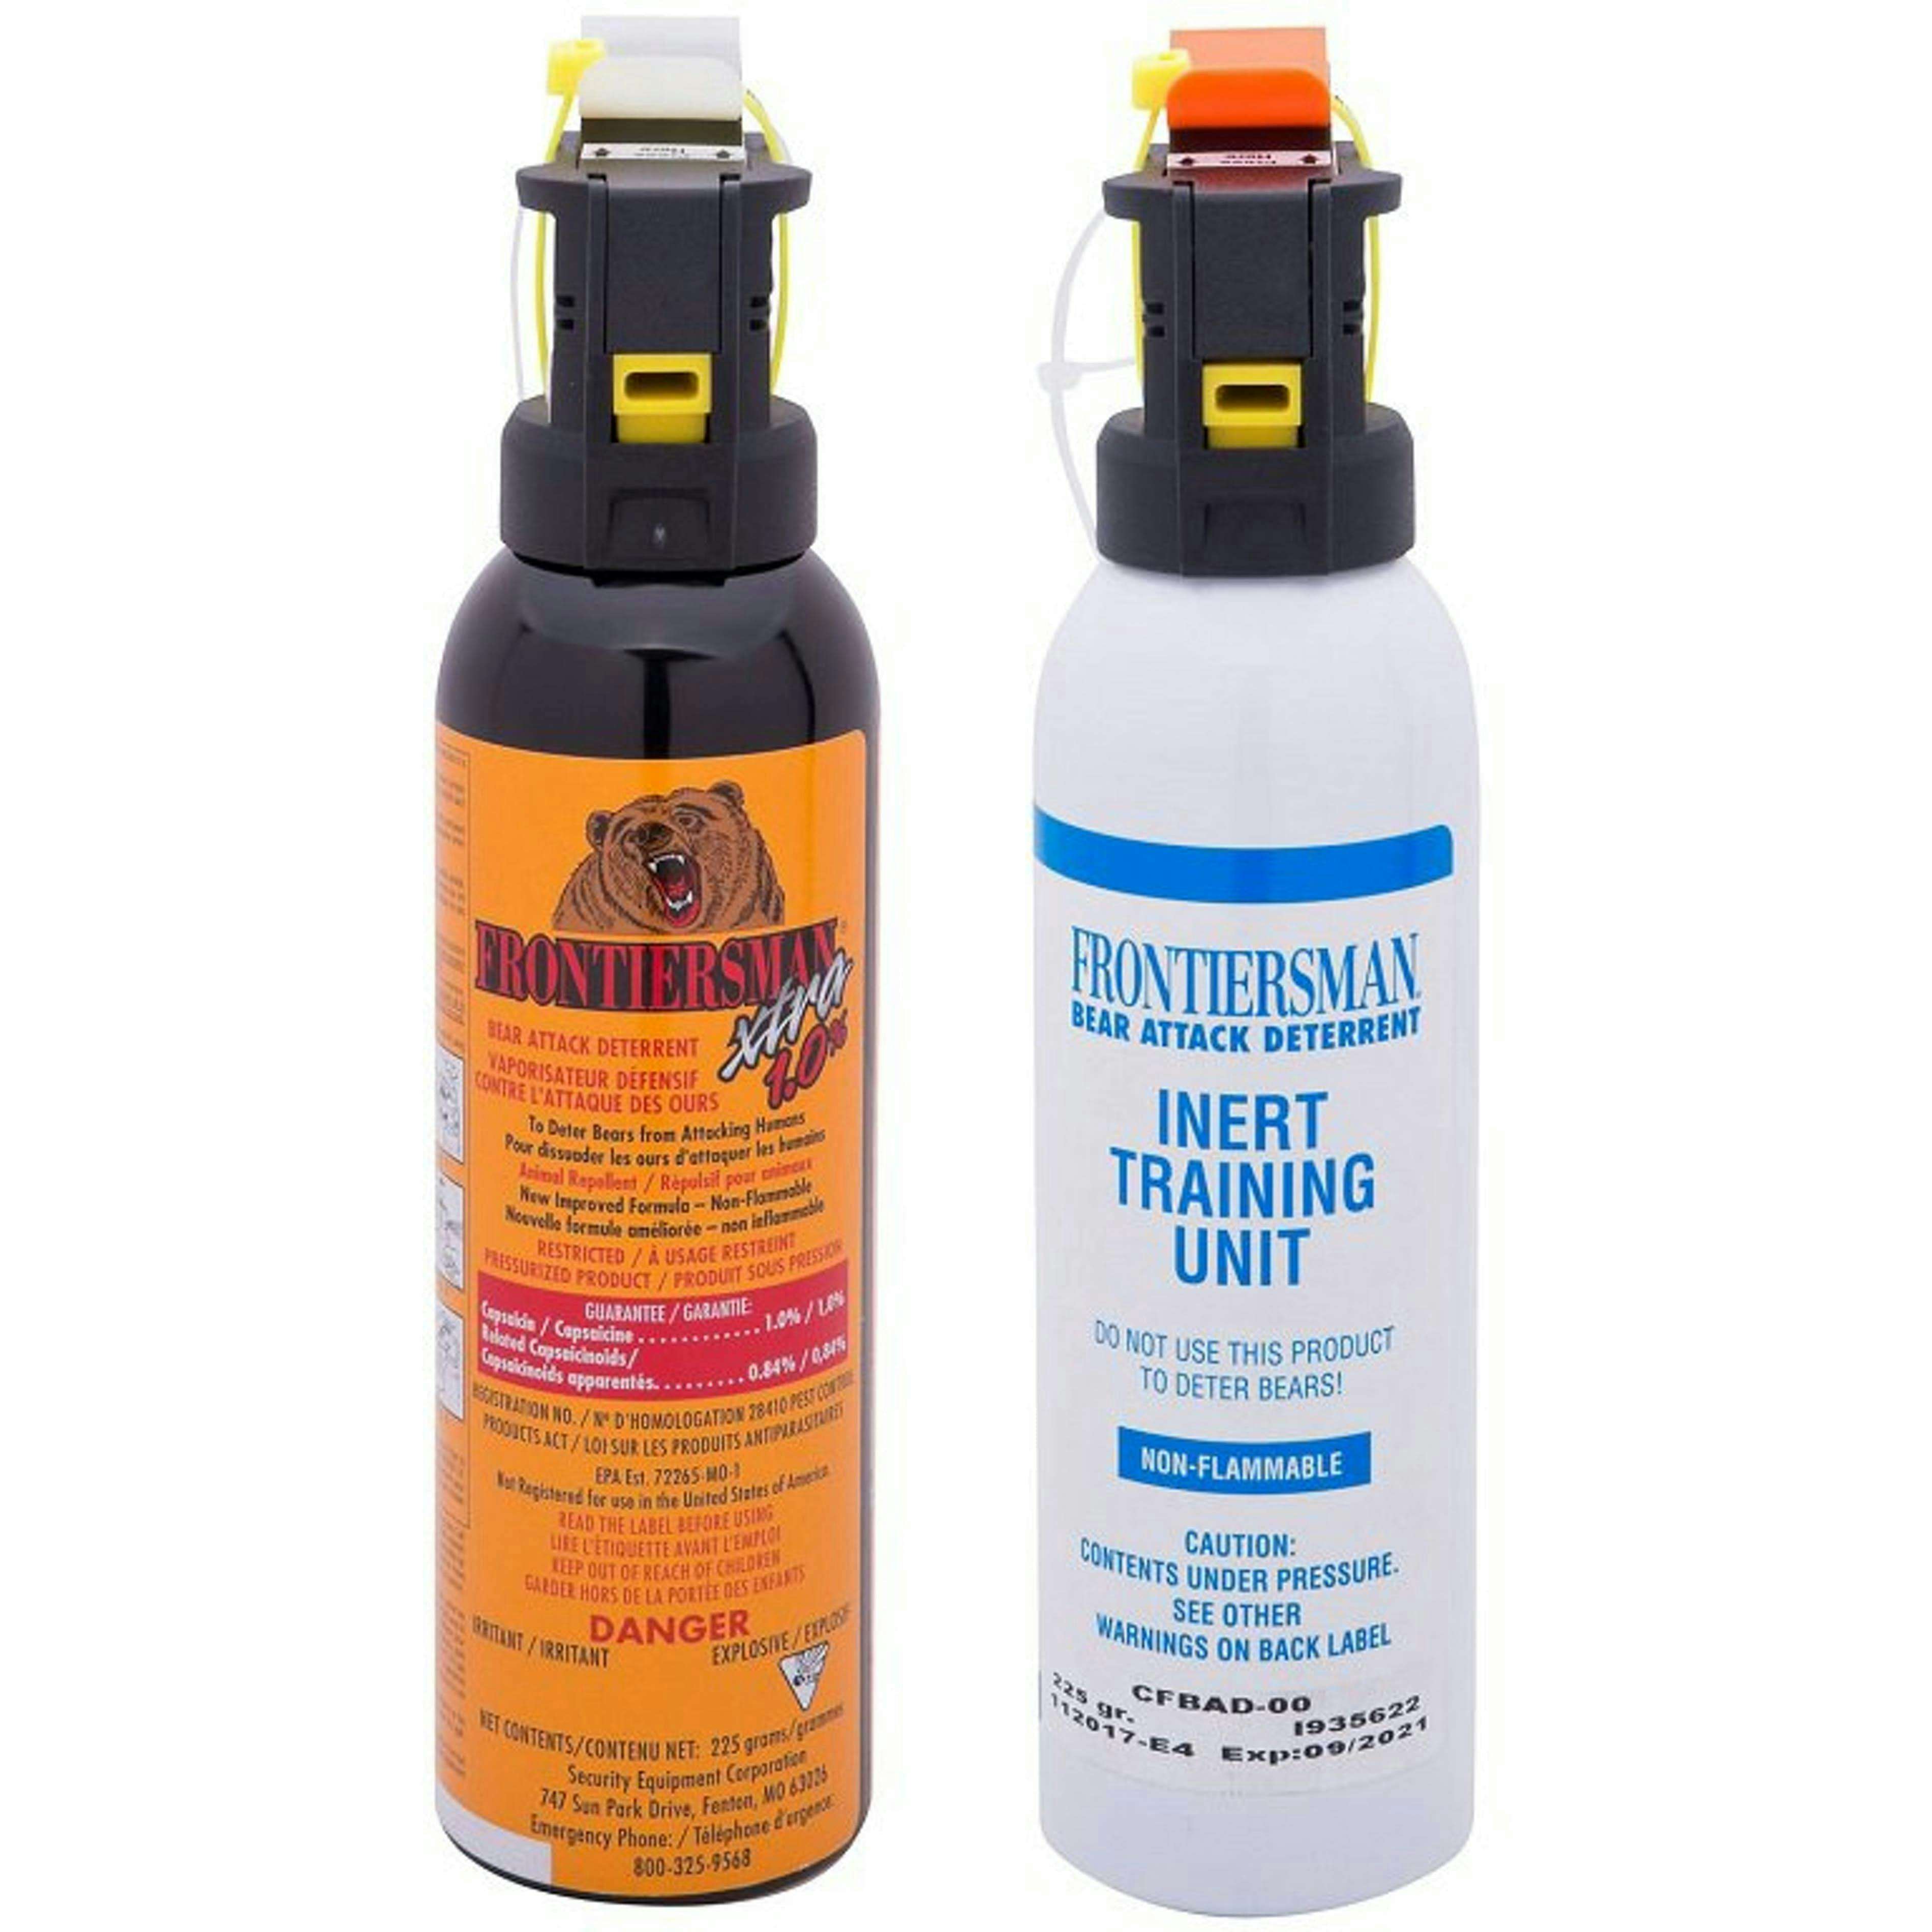 Bear spray with practice canister